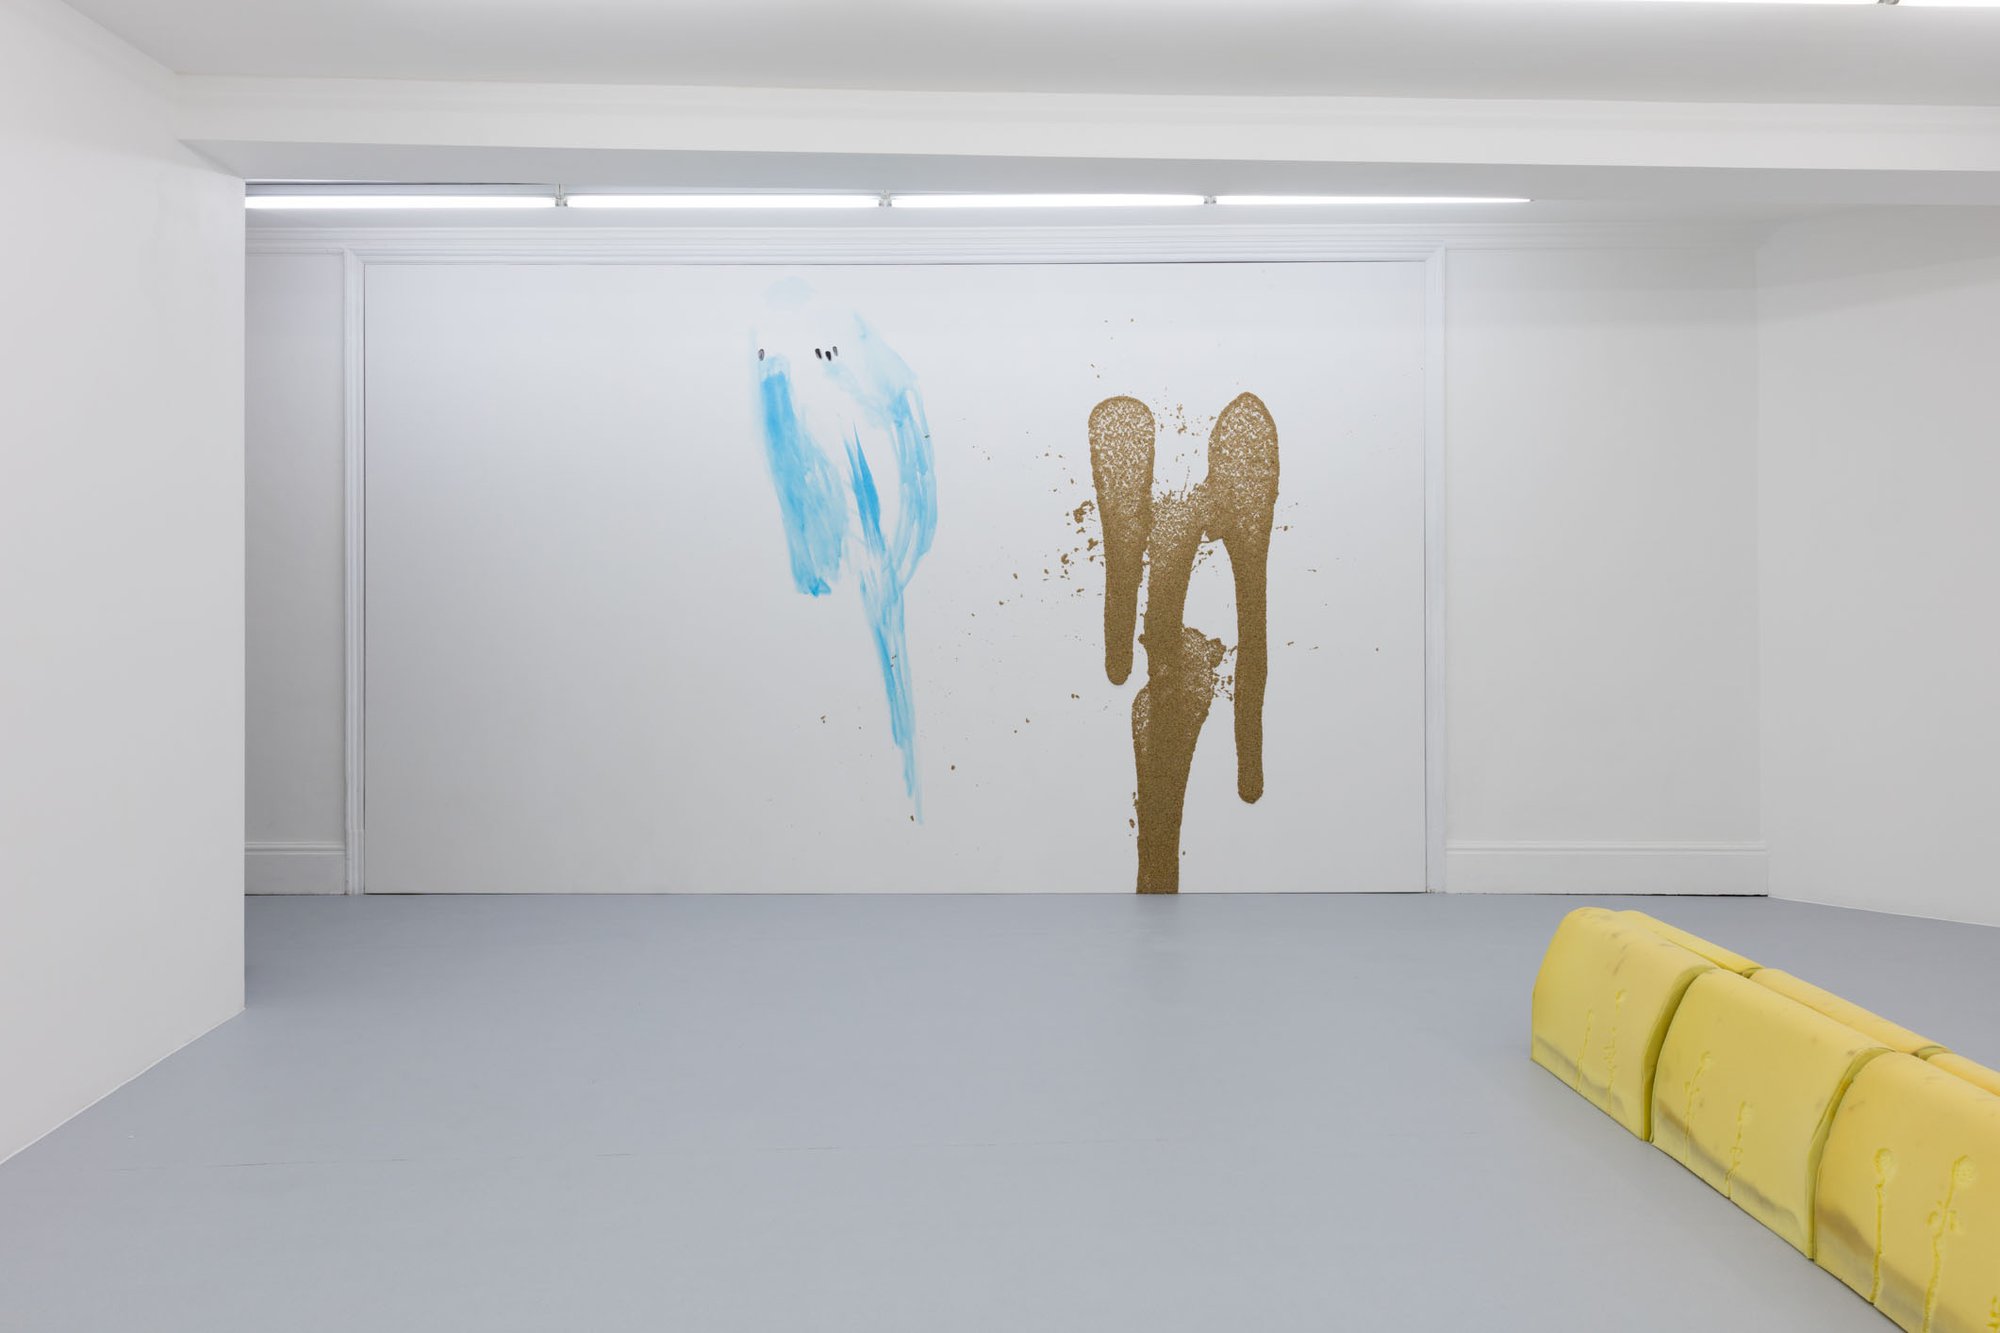 Installation view, Ian Law, you’re adjusting, Rodeo, London, 2015